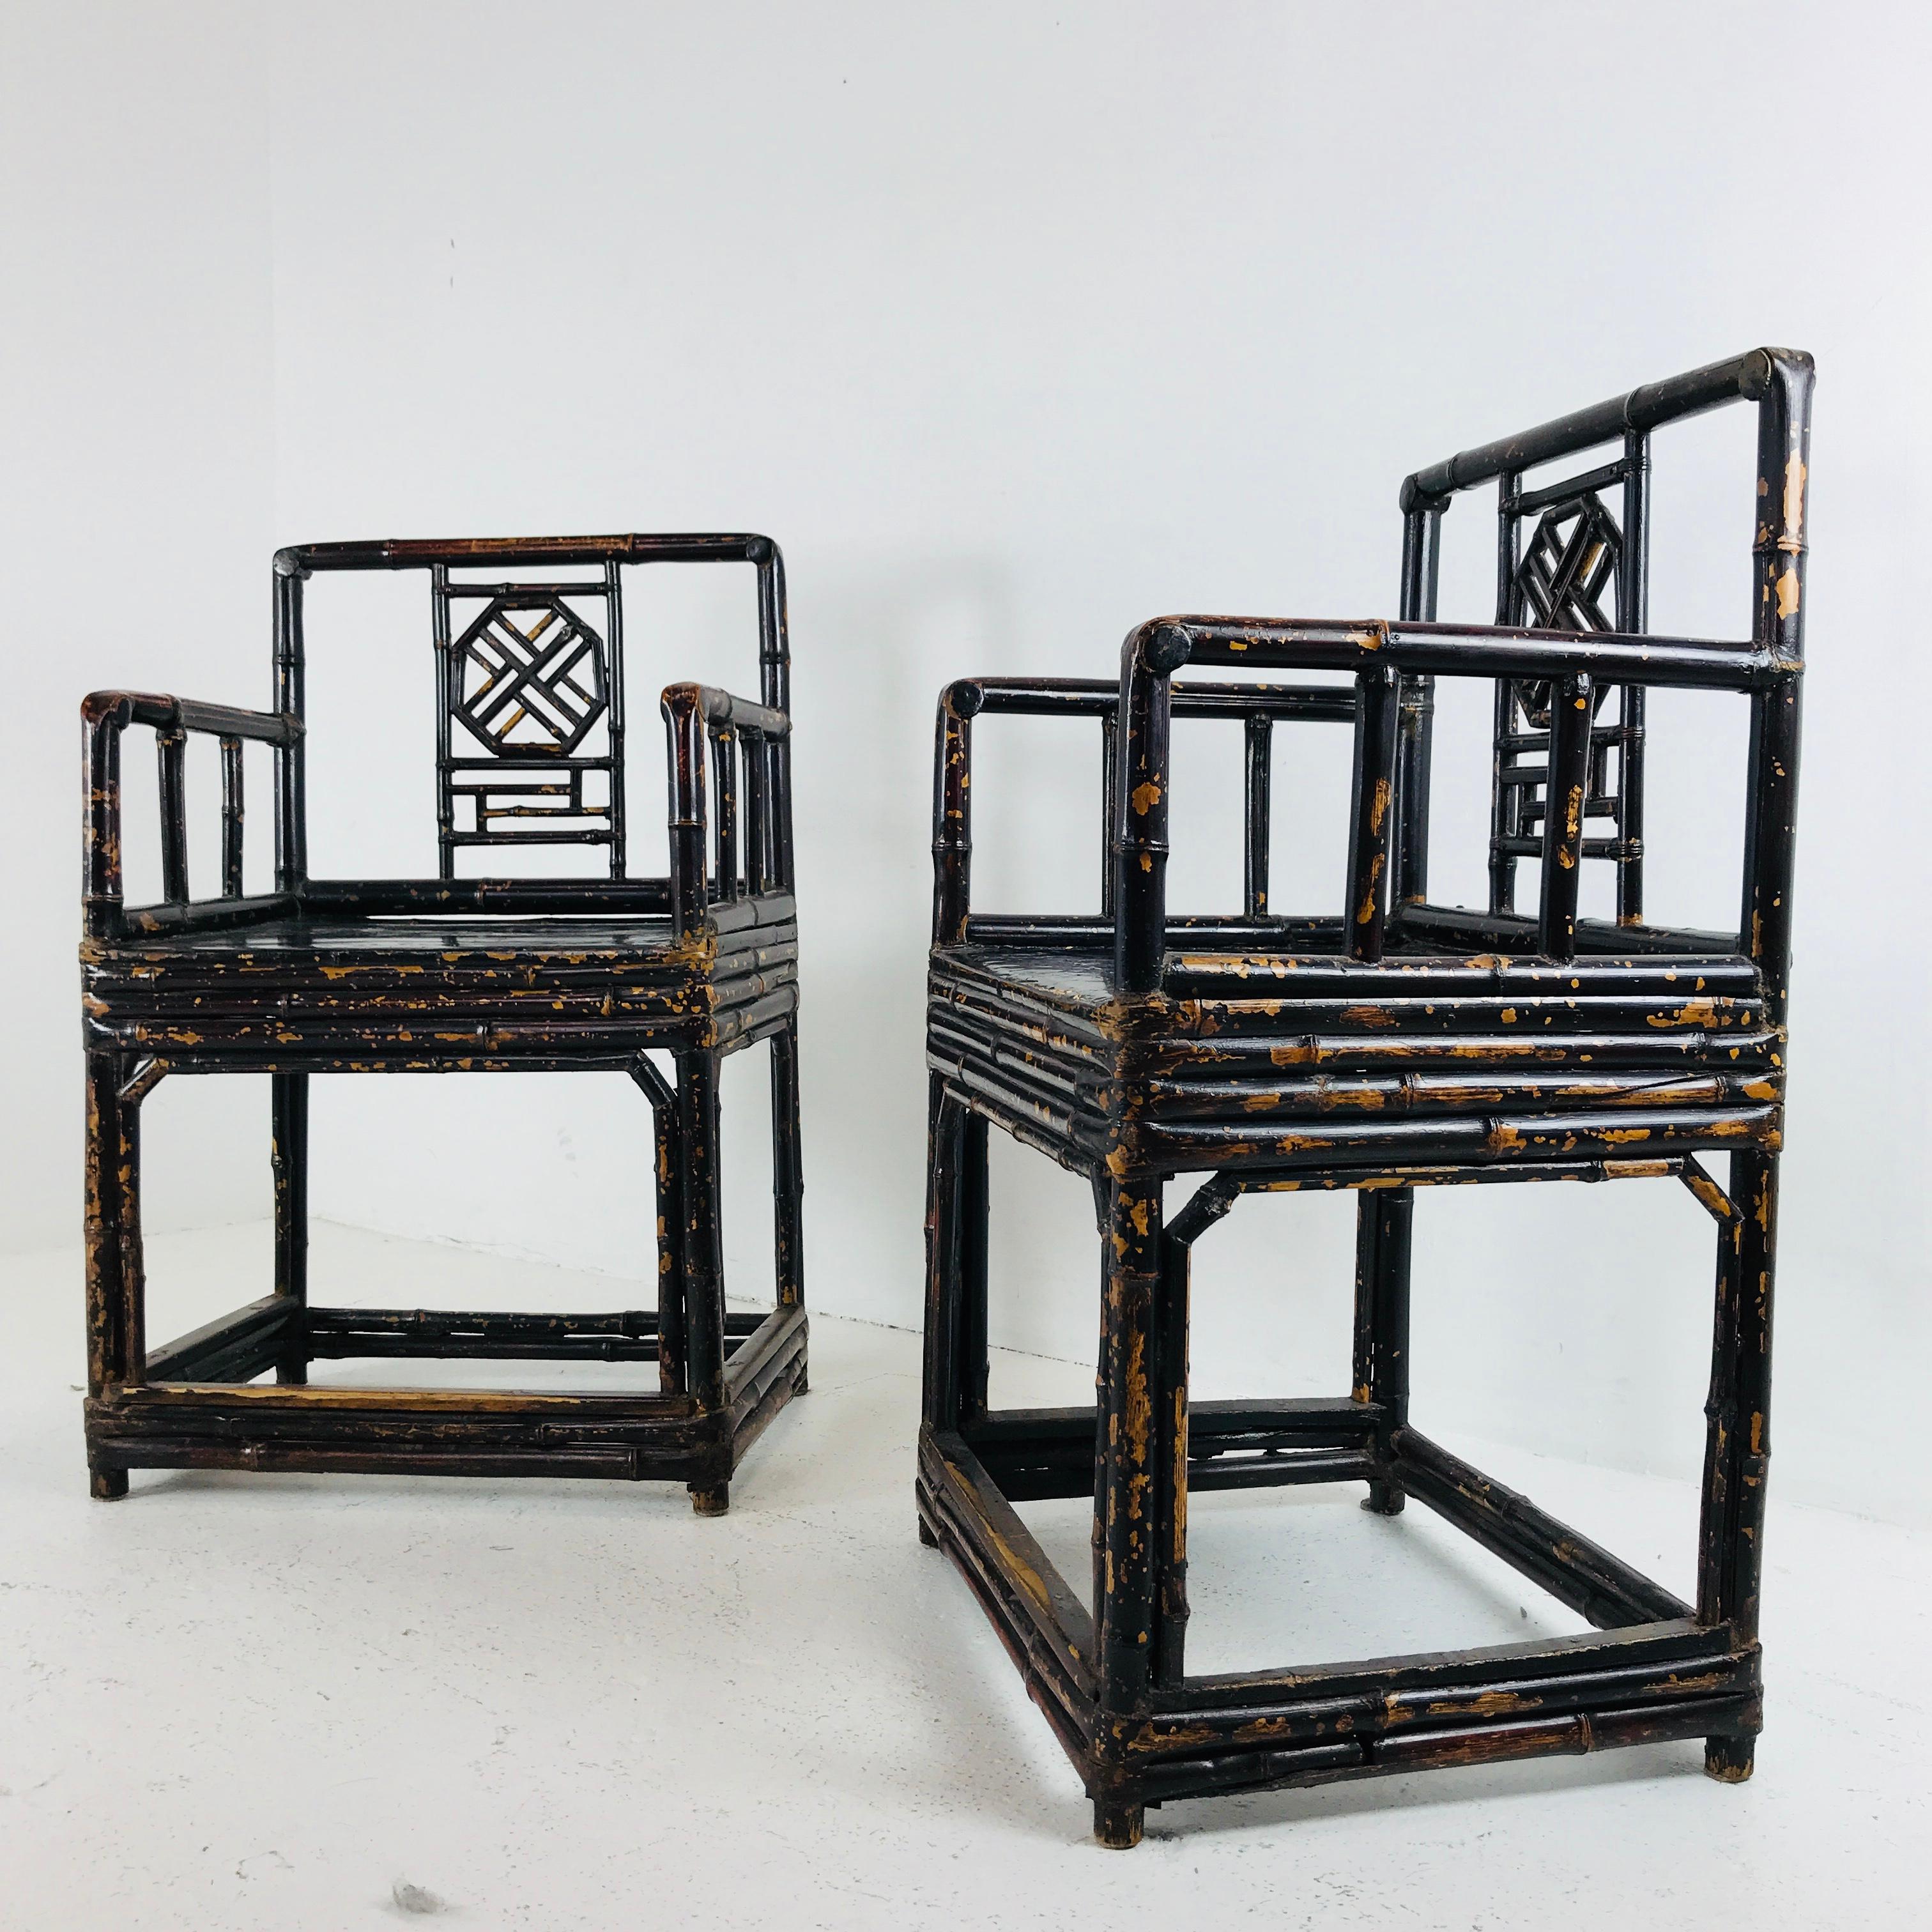 Pair of bamboo rattan chinoiserie armchairs by Brighton Pavillion. Chairs do show signs of wear from use and age. Refinishing is recommended.

Dimensions:
21